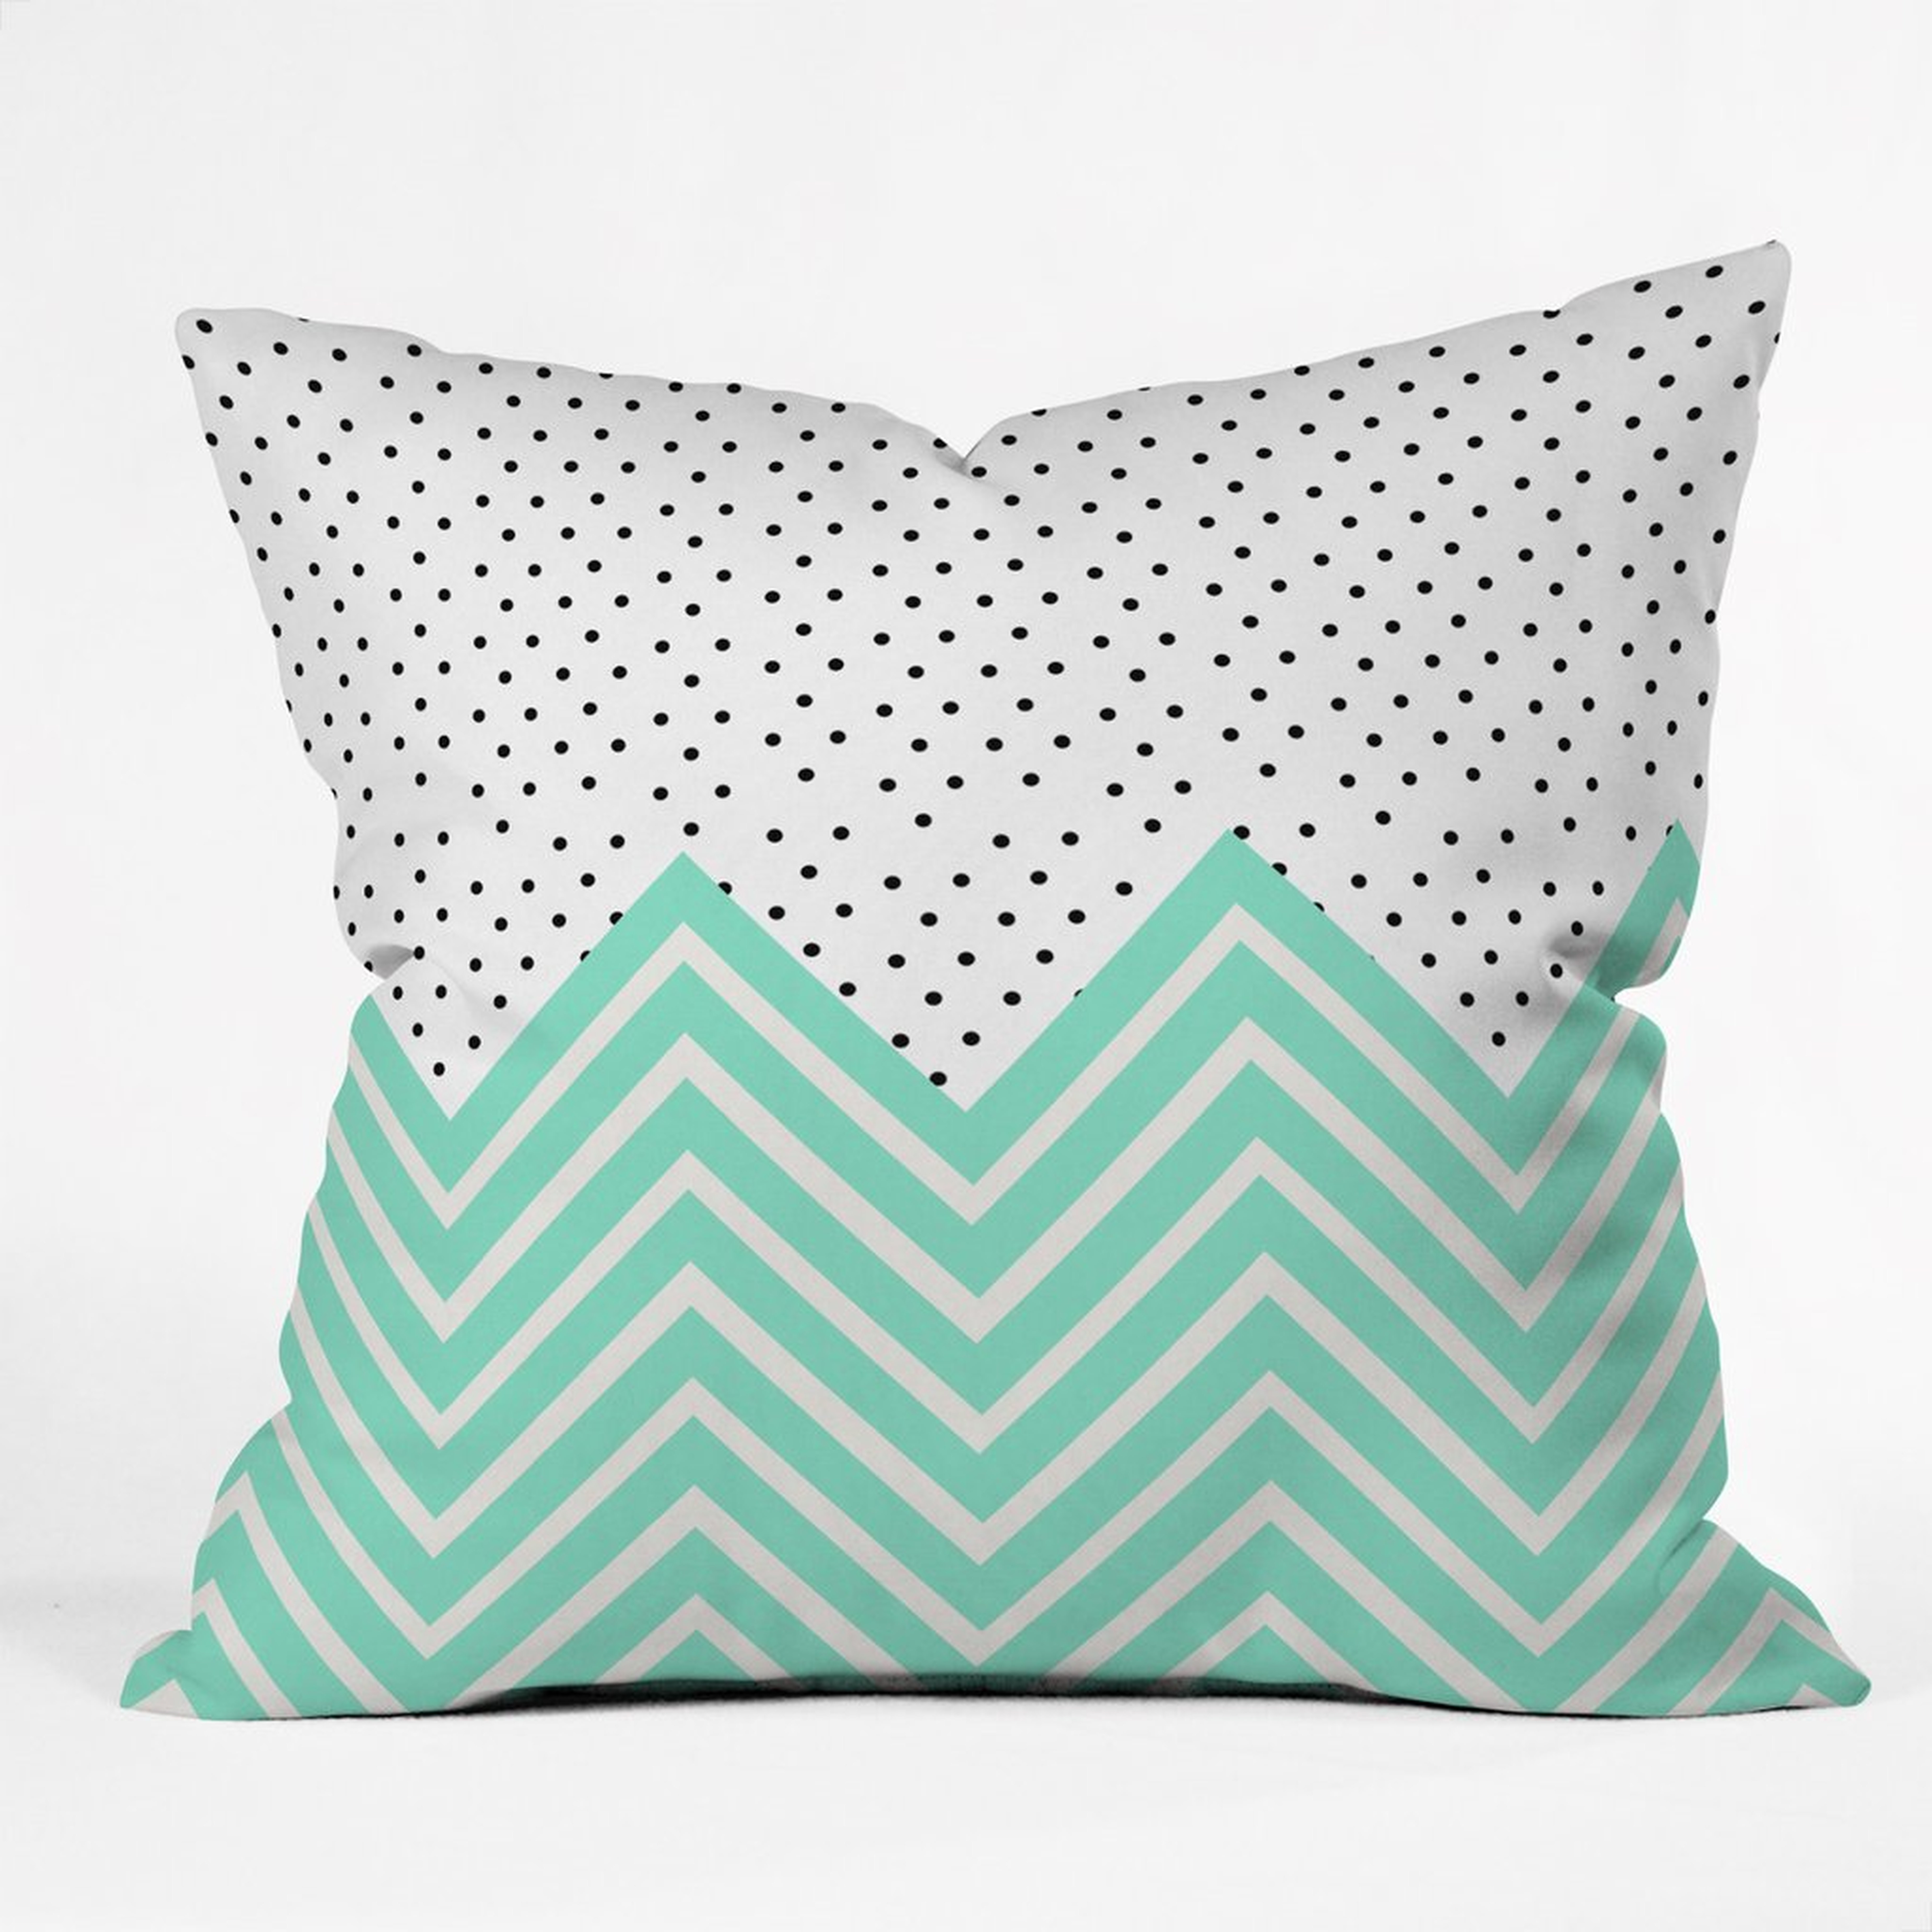 MINTY CHEVRON AND DOTS Throw Pillow - 18" x 18" - Polyester fill insert - Wander Print Co.